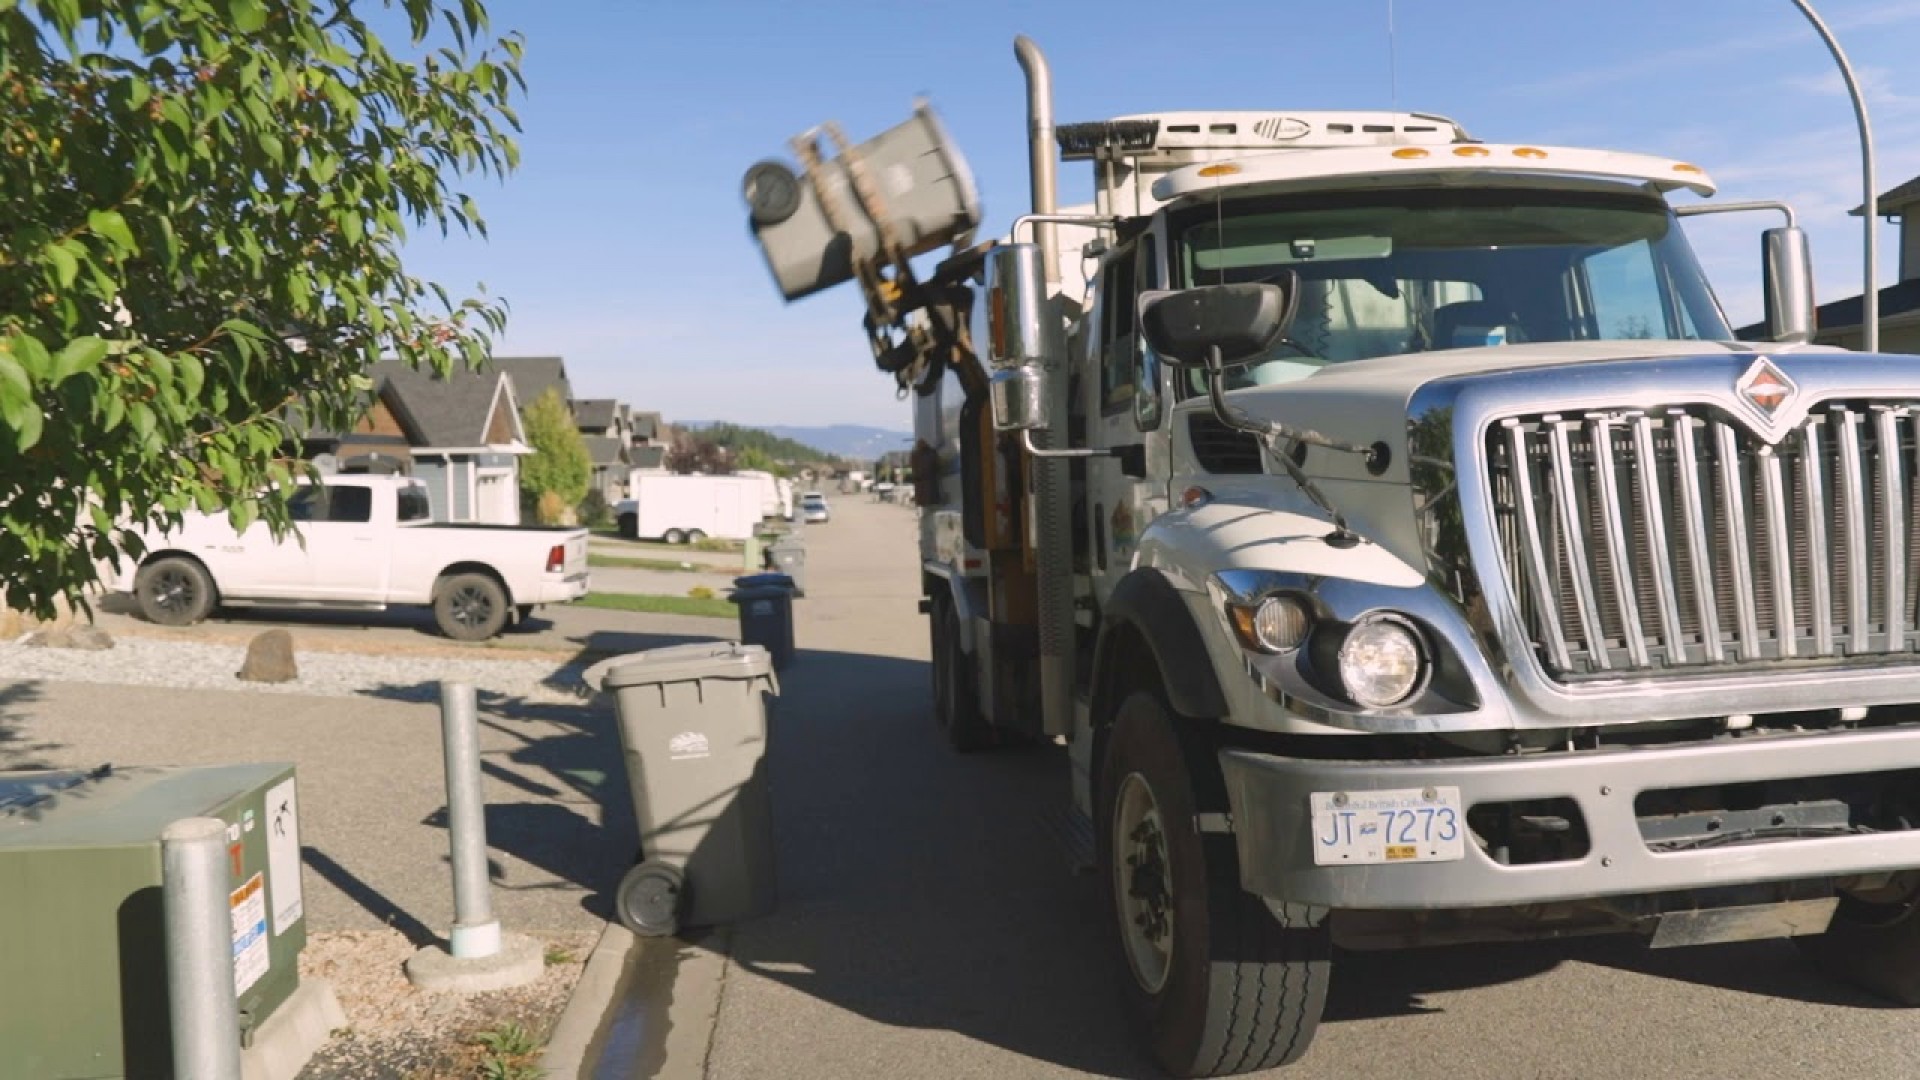 City of Kamloops | Recycling